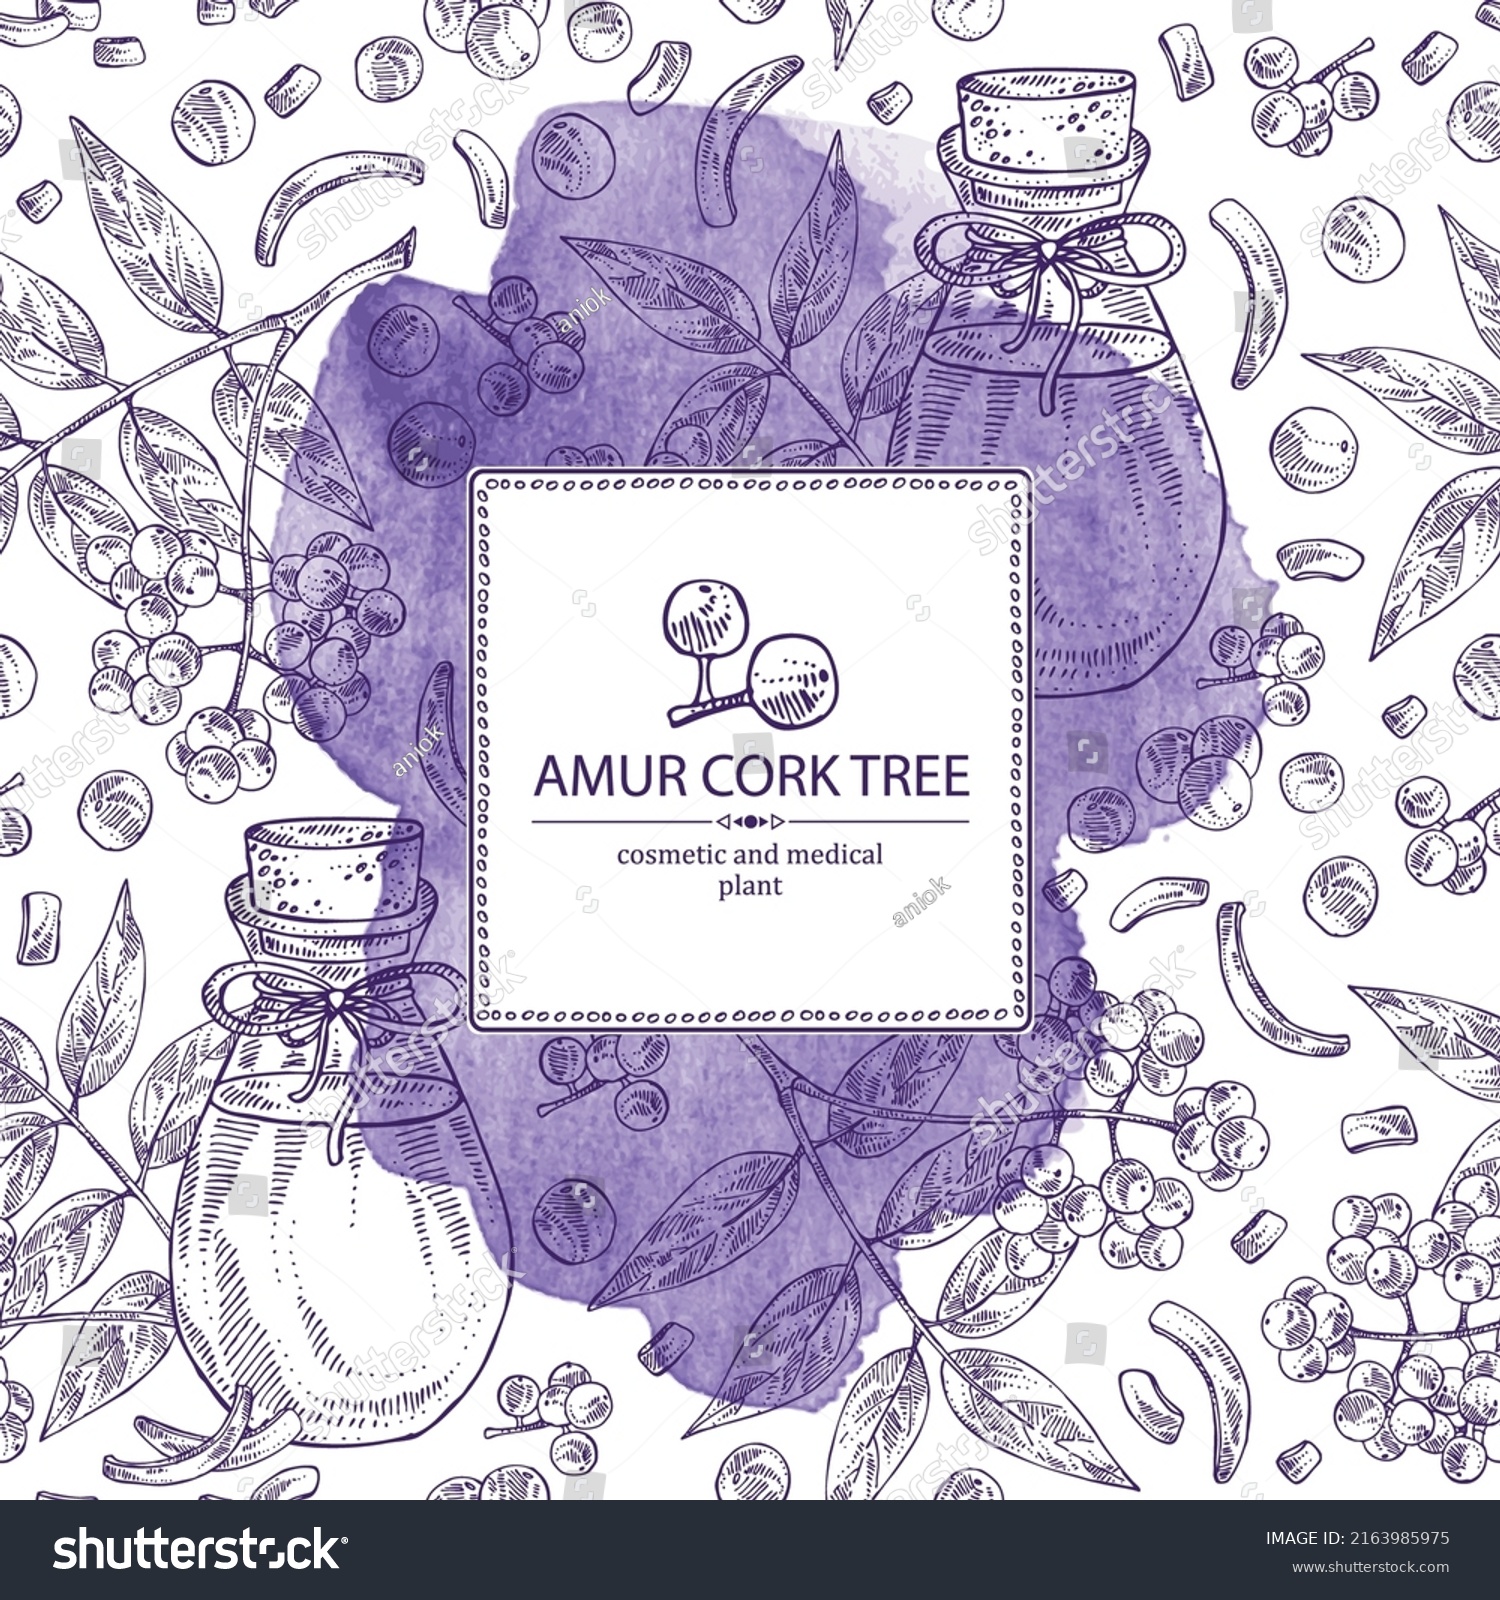 SVG of Watercolor background with amur cork tree: berries, plant, amur cork tree bark and bottle of amur cork tree oil. Phellodendron amurense.  Cosmetic, perfumery and medical plant. svg